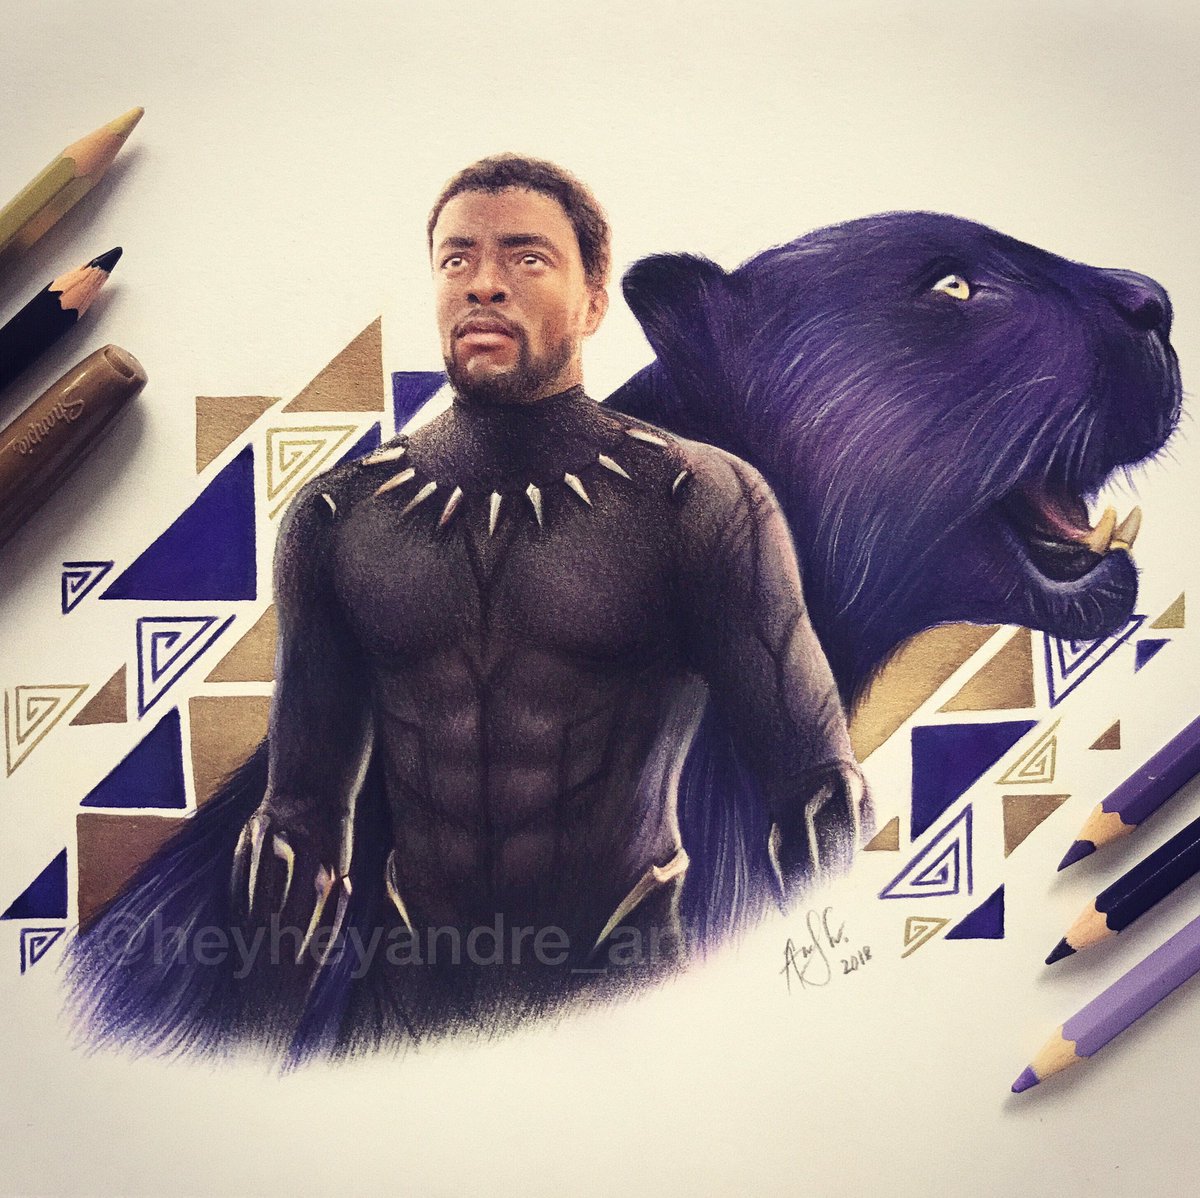 Andre Manguba On Twitter Black Panther Drawn With Colored Pencils Hope Yall Like It Chadwickboseman Theblackpanther Blackpanther Blackpantherfanart Wakanda Https T Co 76b1vgk7n4